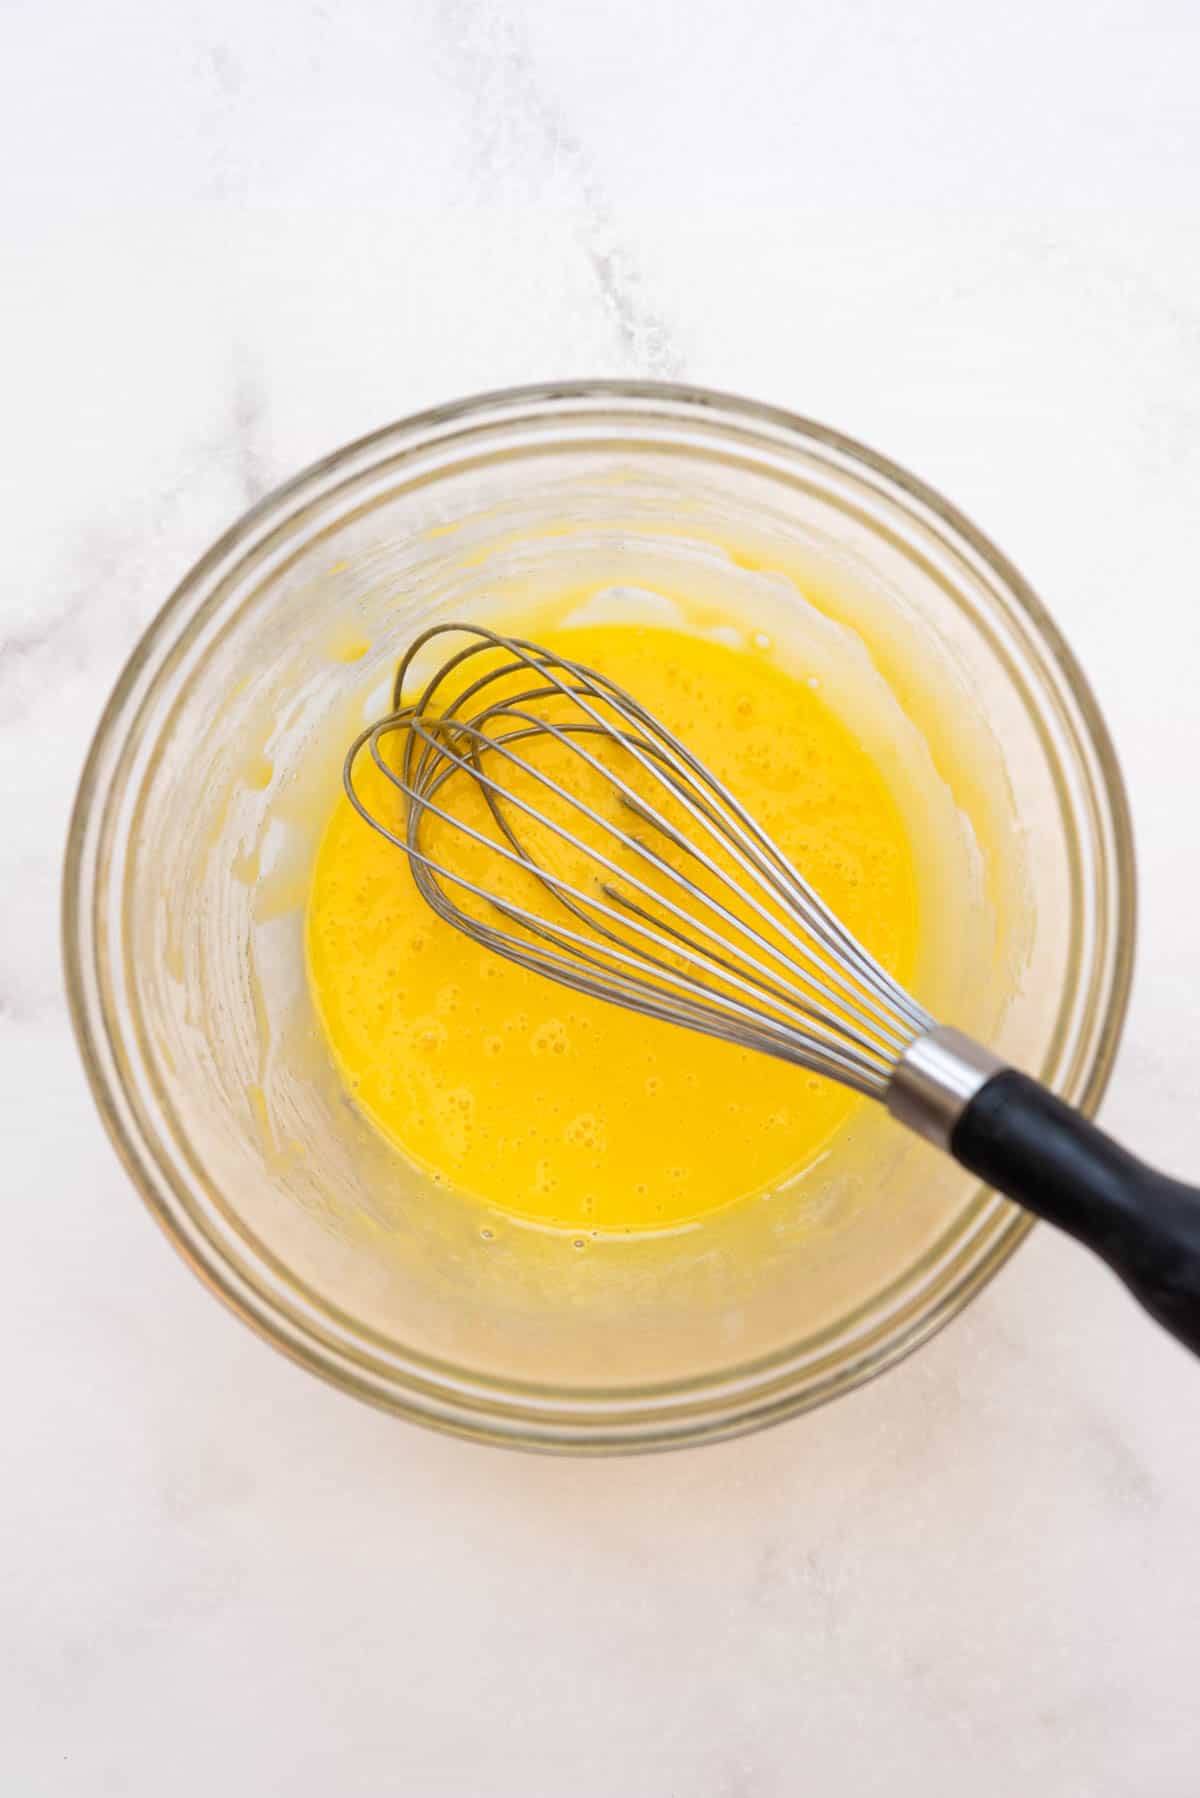 Whisking egg yolks and sugar together in a glass mixing bowl.